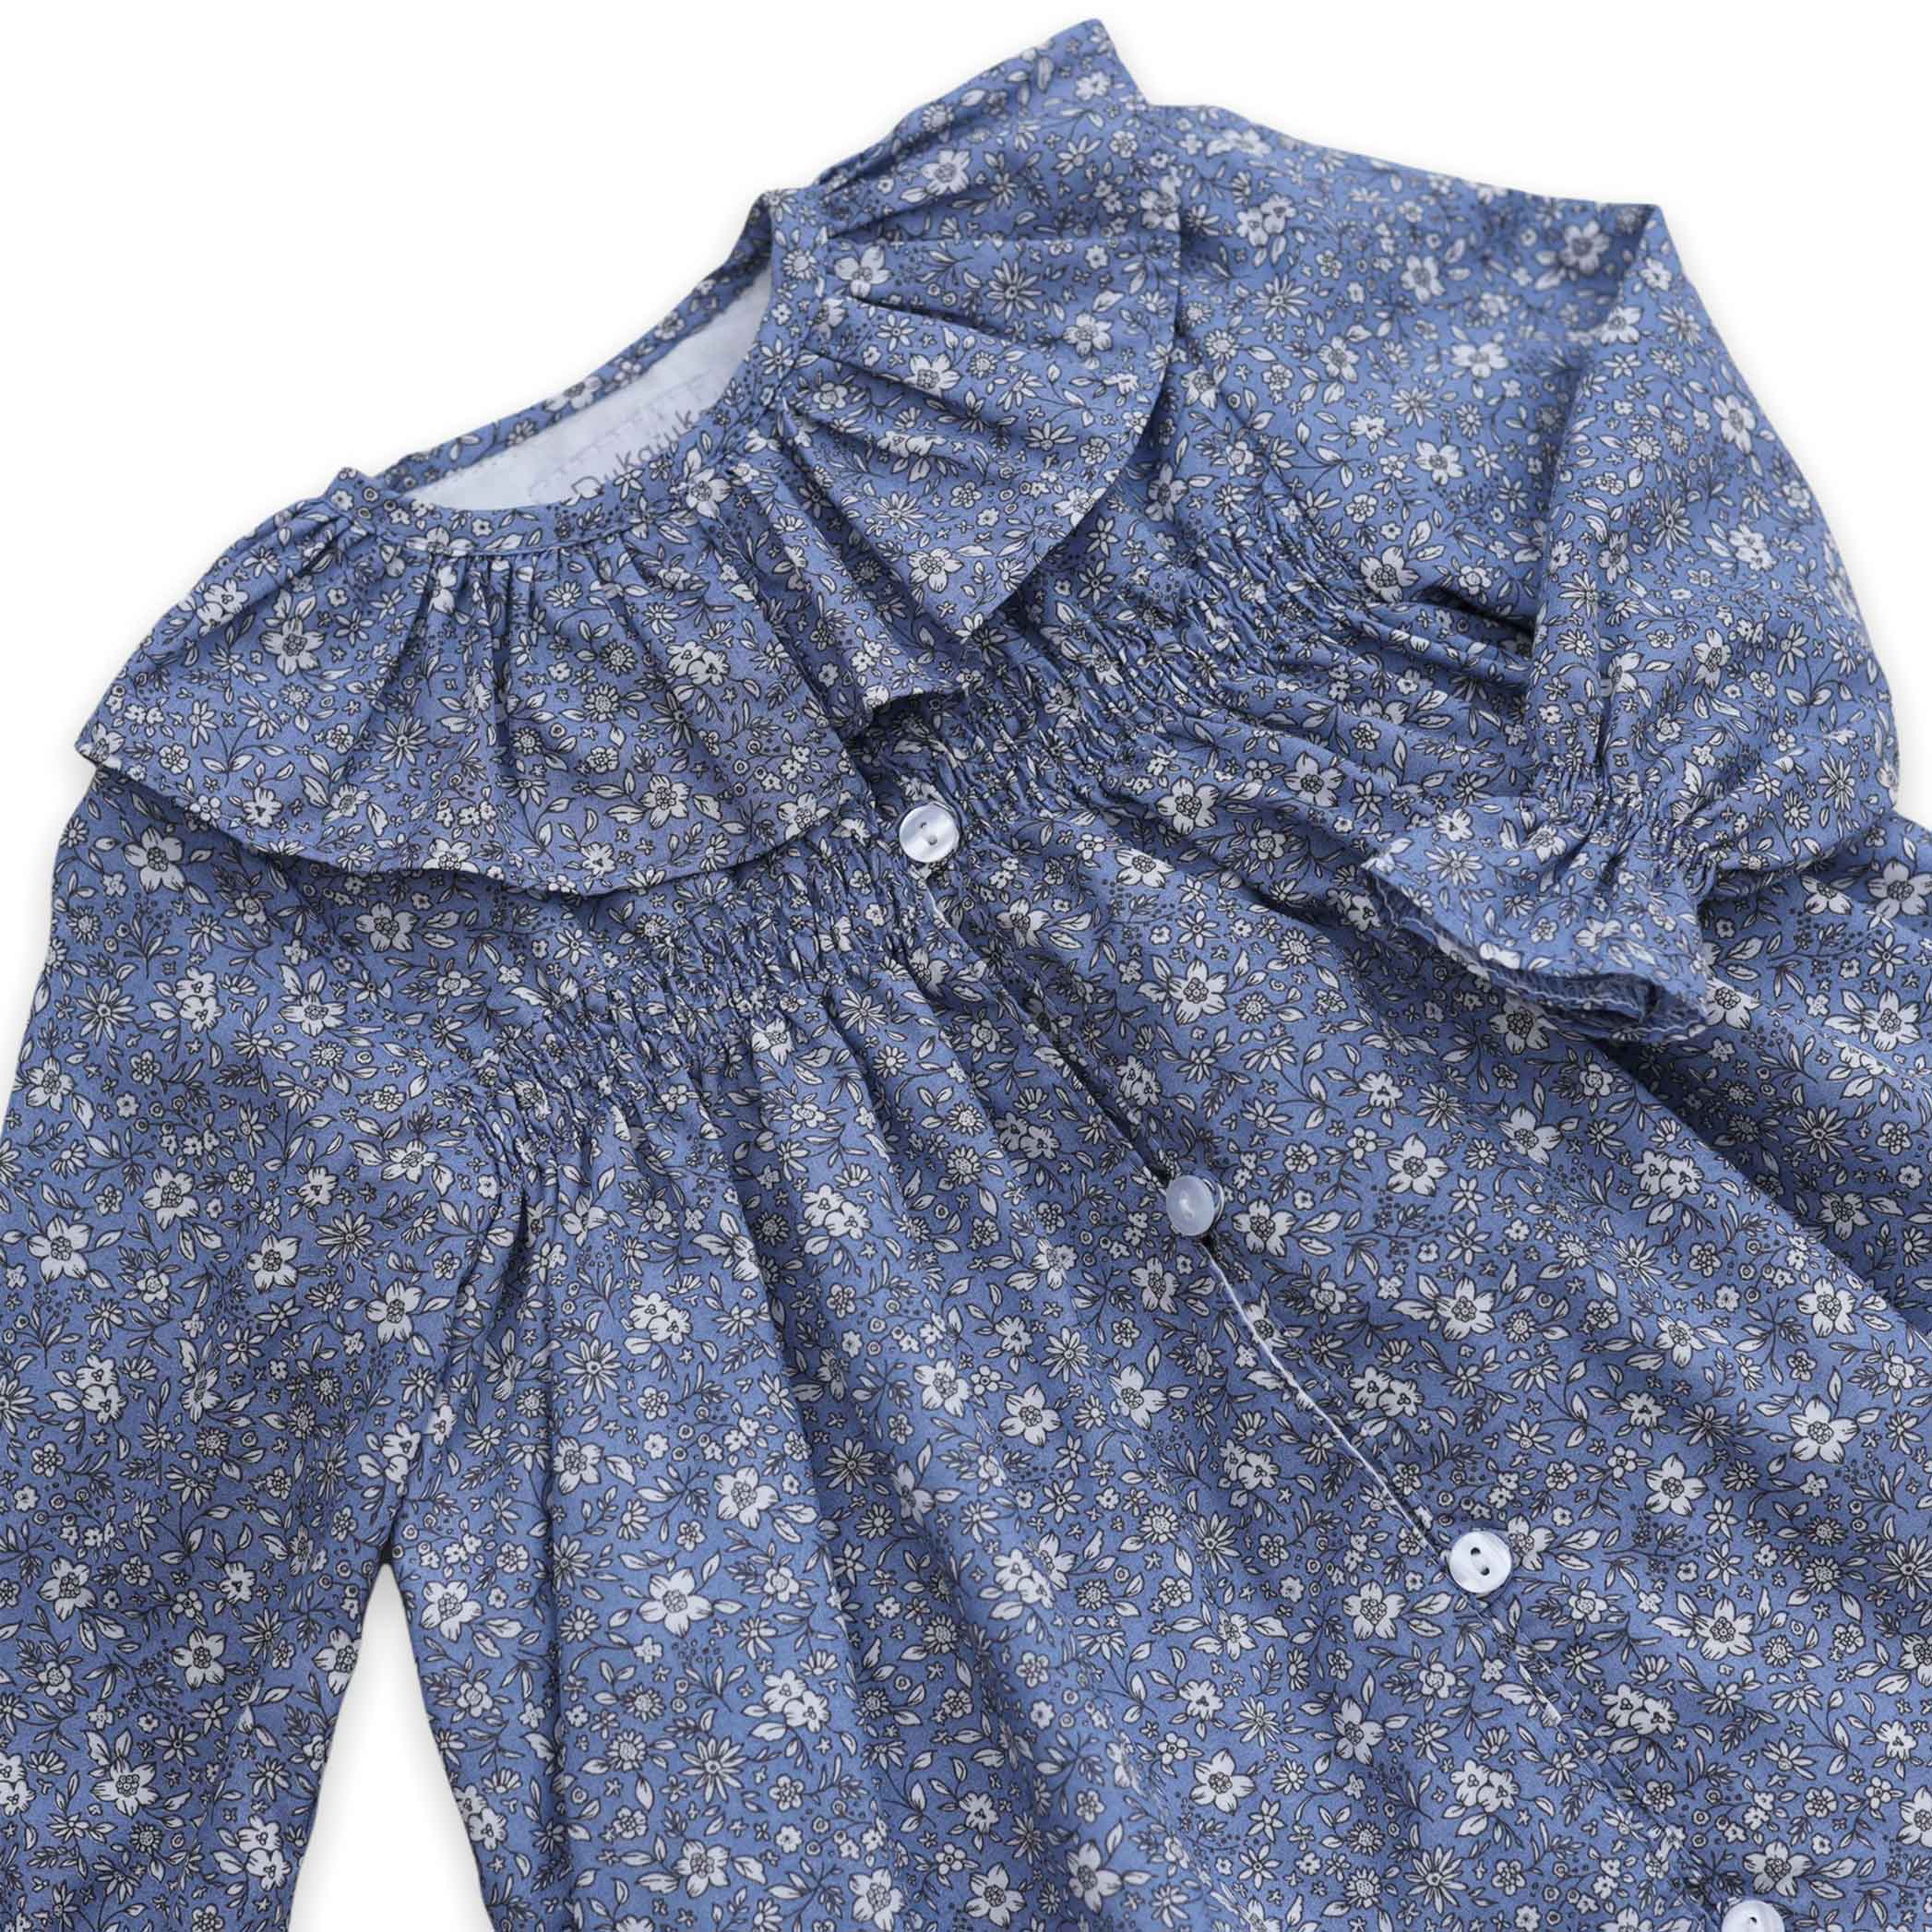 frill collar blue floral baby girl romper with smocking